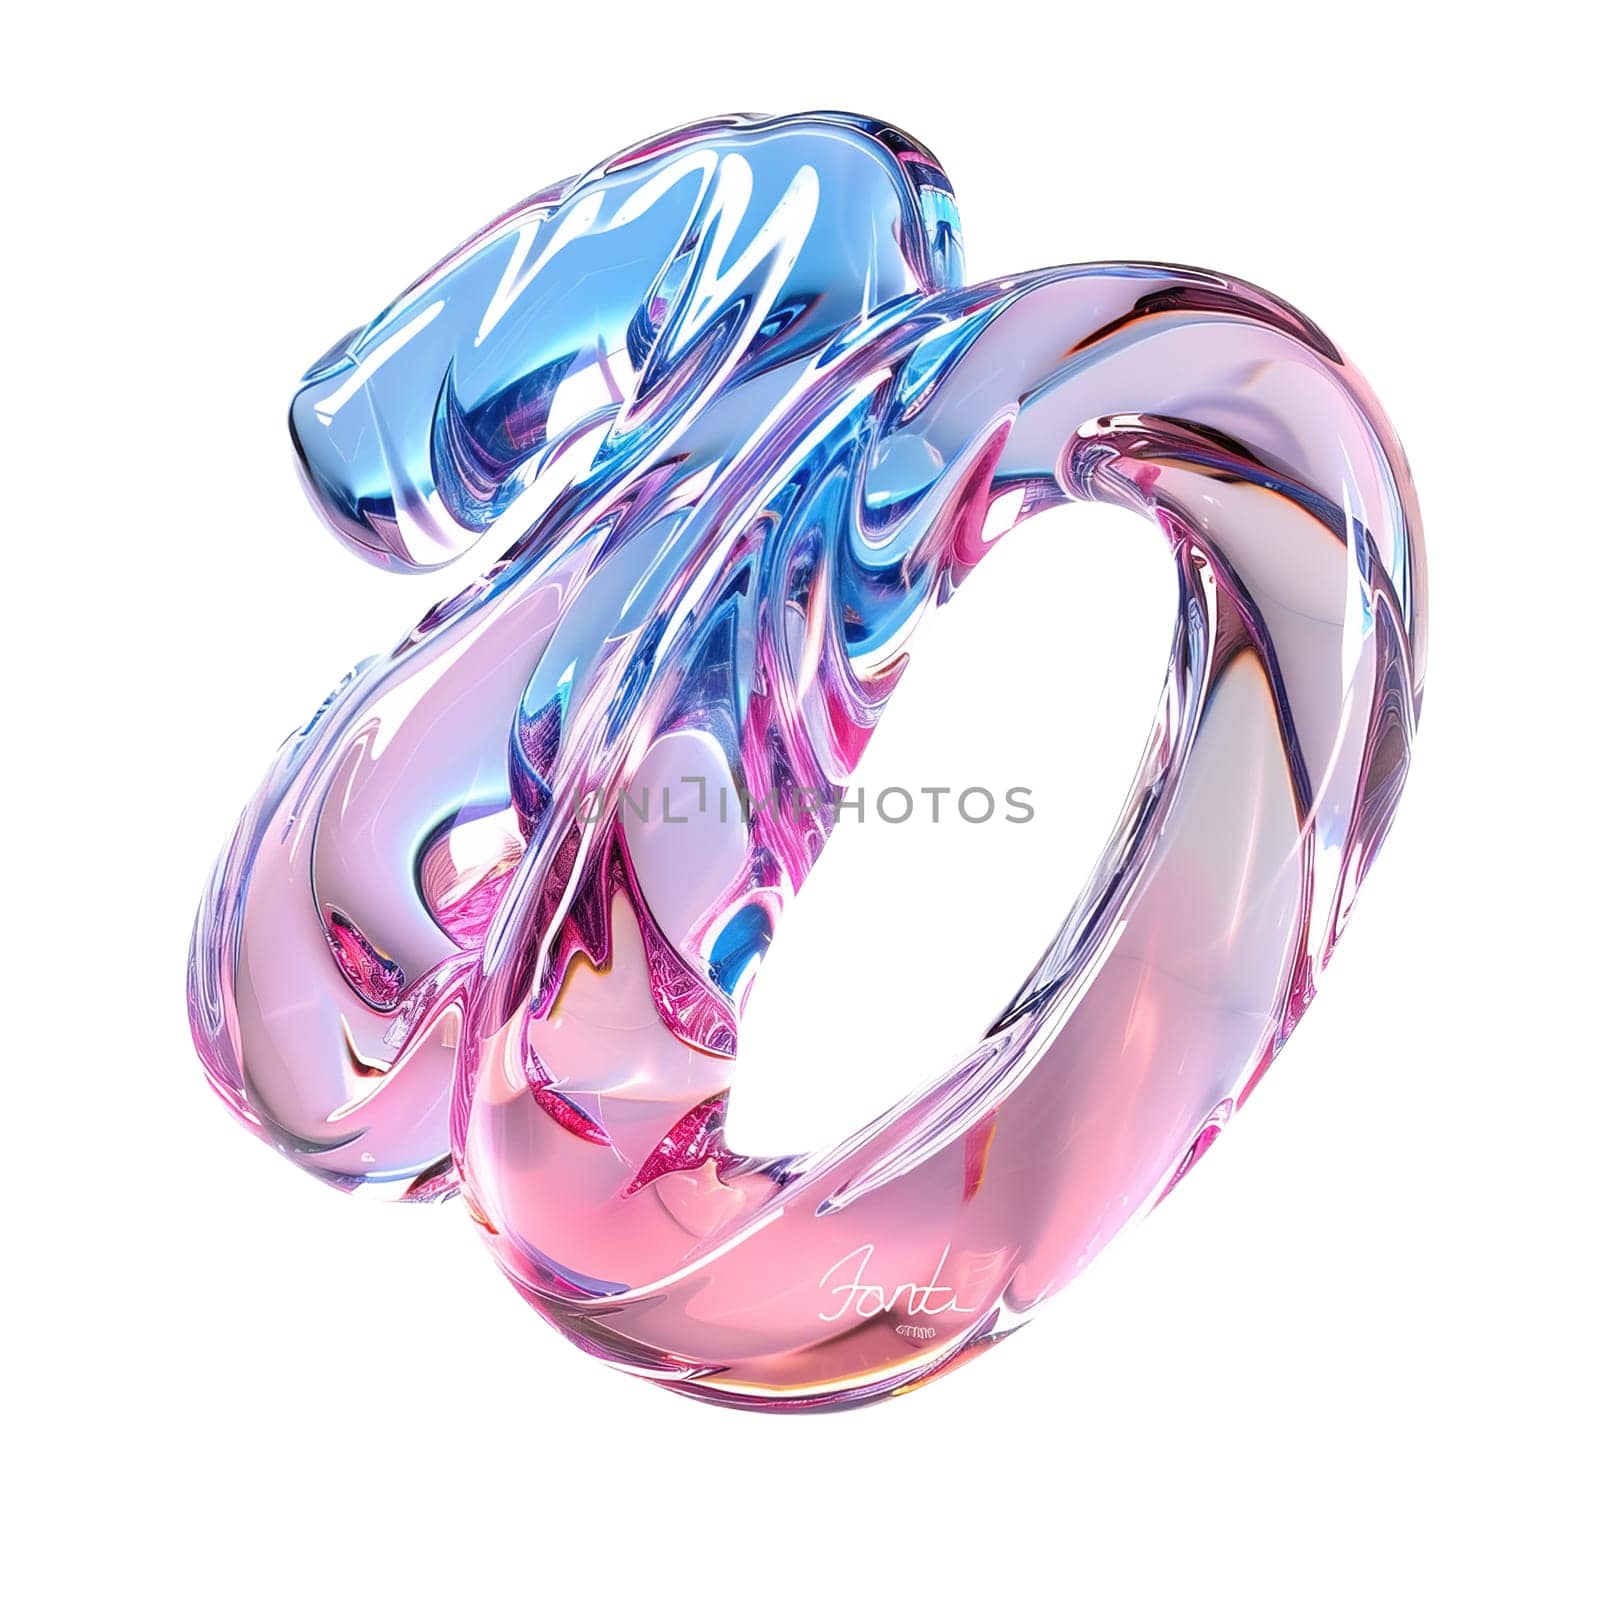 glassy pink and blue abstract figure for logo in the style of neumorphism, soft natural lighting simple and elegant space, close-up, super high detaill by mr-tigga